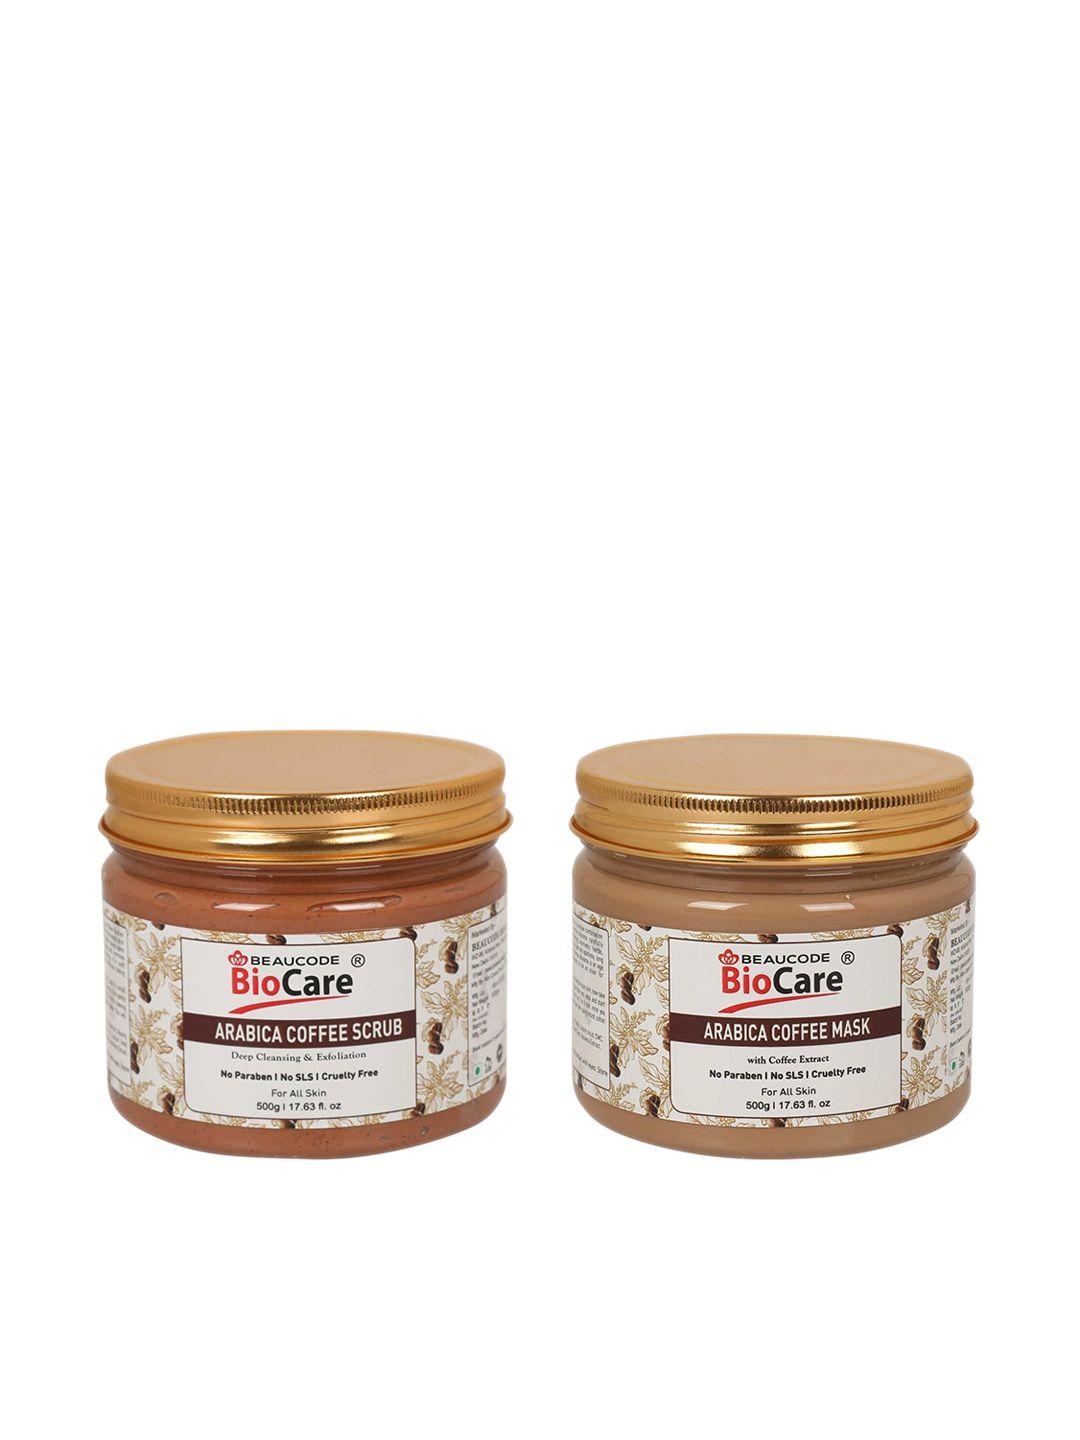 beaucode biocare  pack of 2 arabica coffee face and body mask and scrub 500g